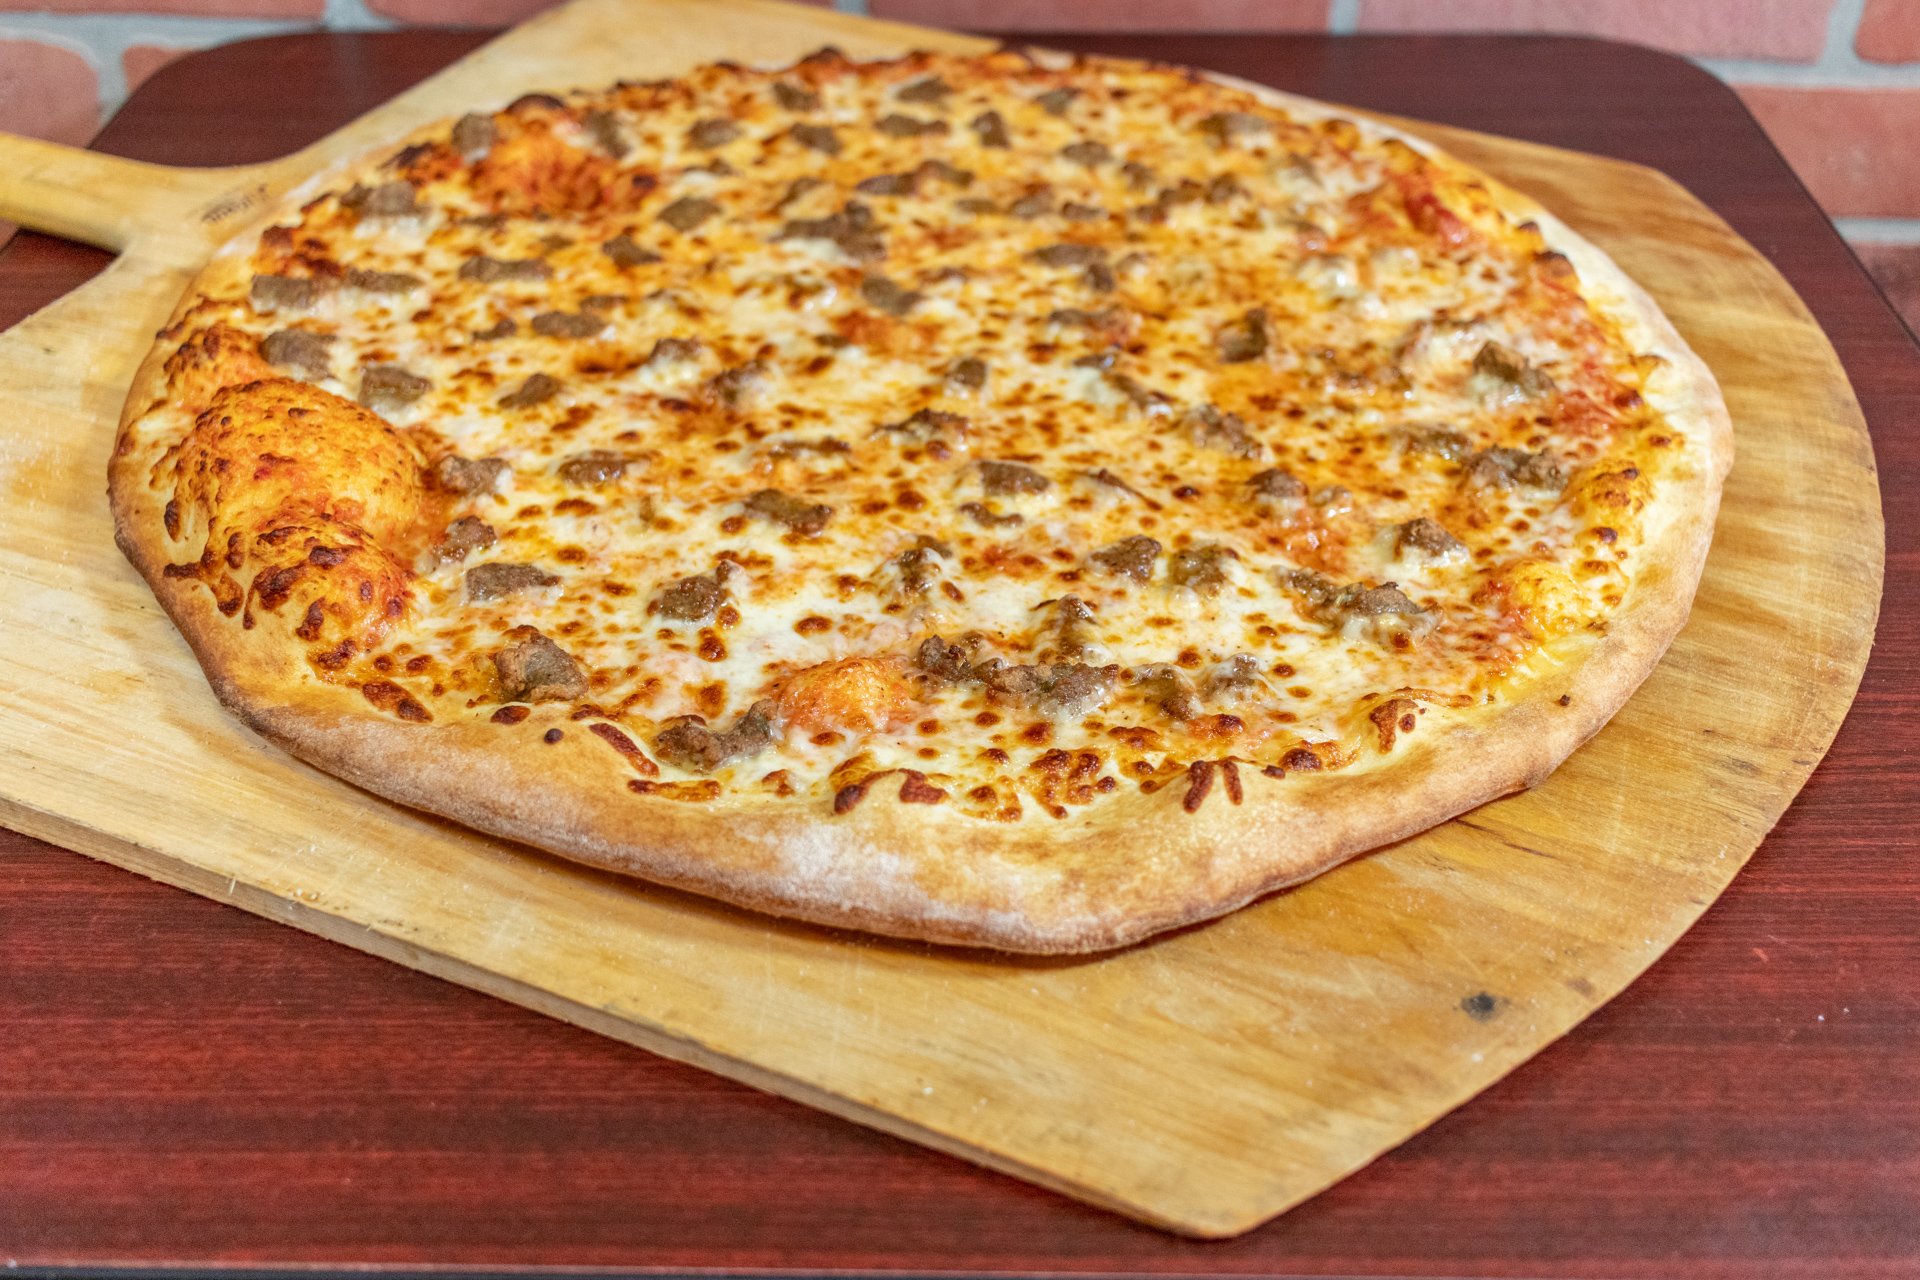 Sausage Pizza Delivery Near Me - Best Sausage Pizza Ingredients